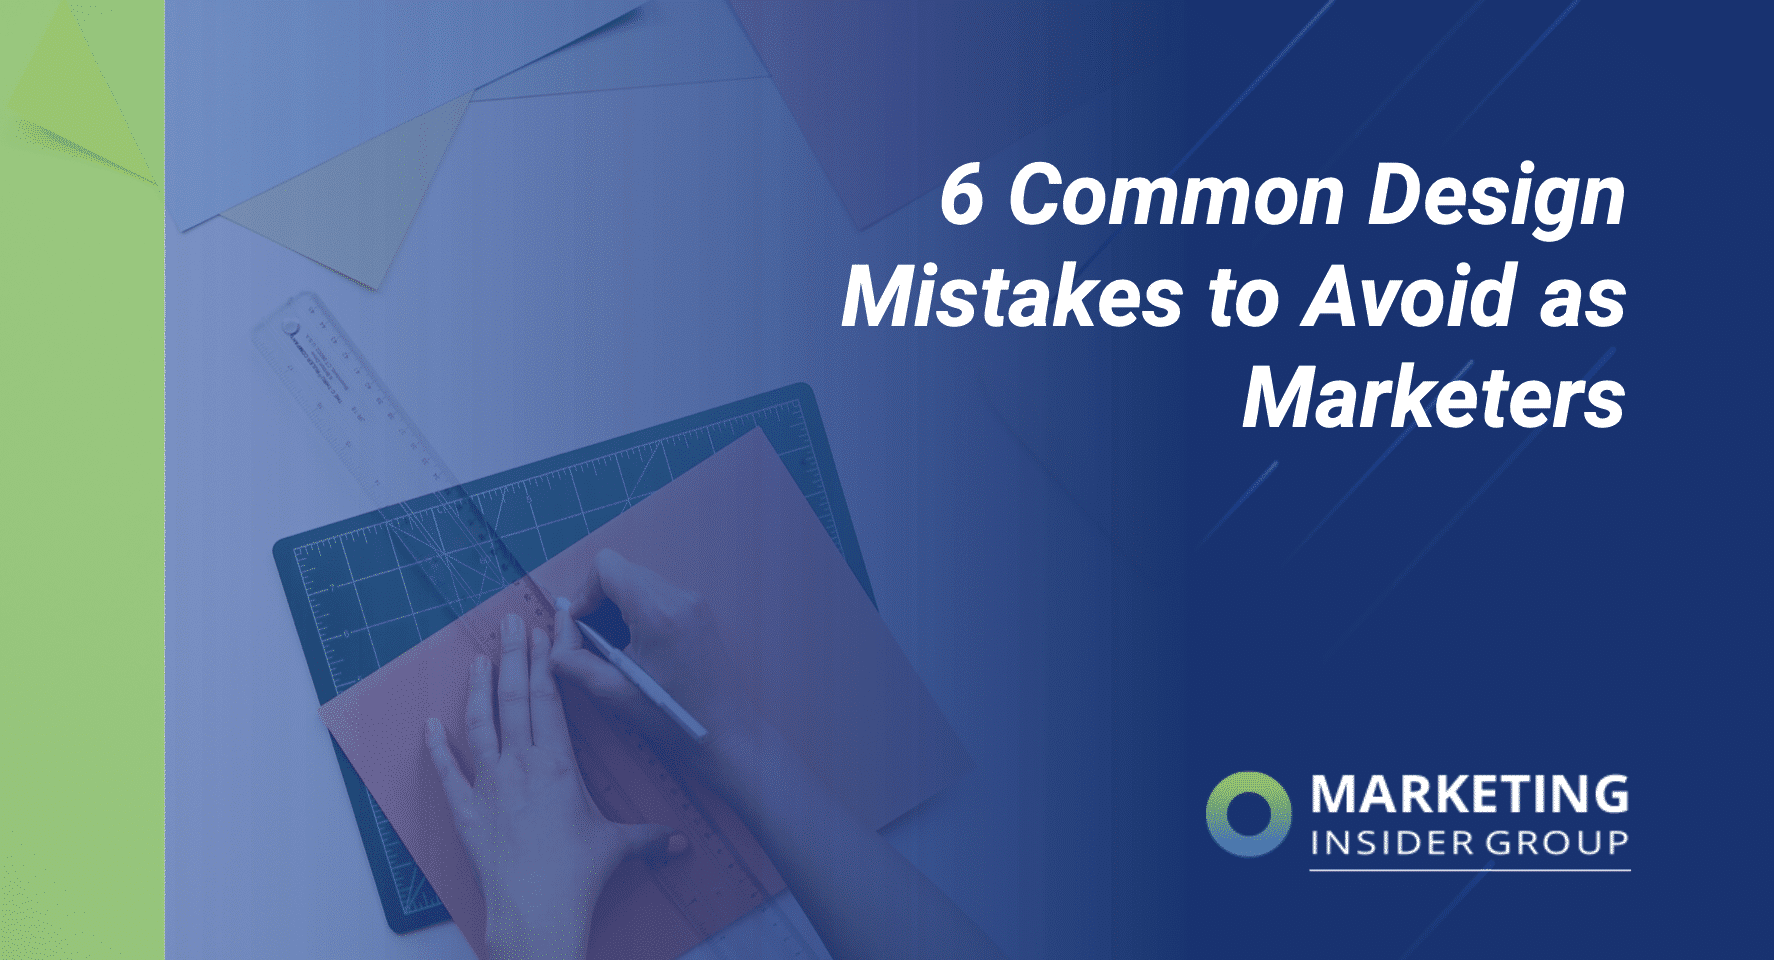 6 Common Design Mistakes to Avoid as Marketers